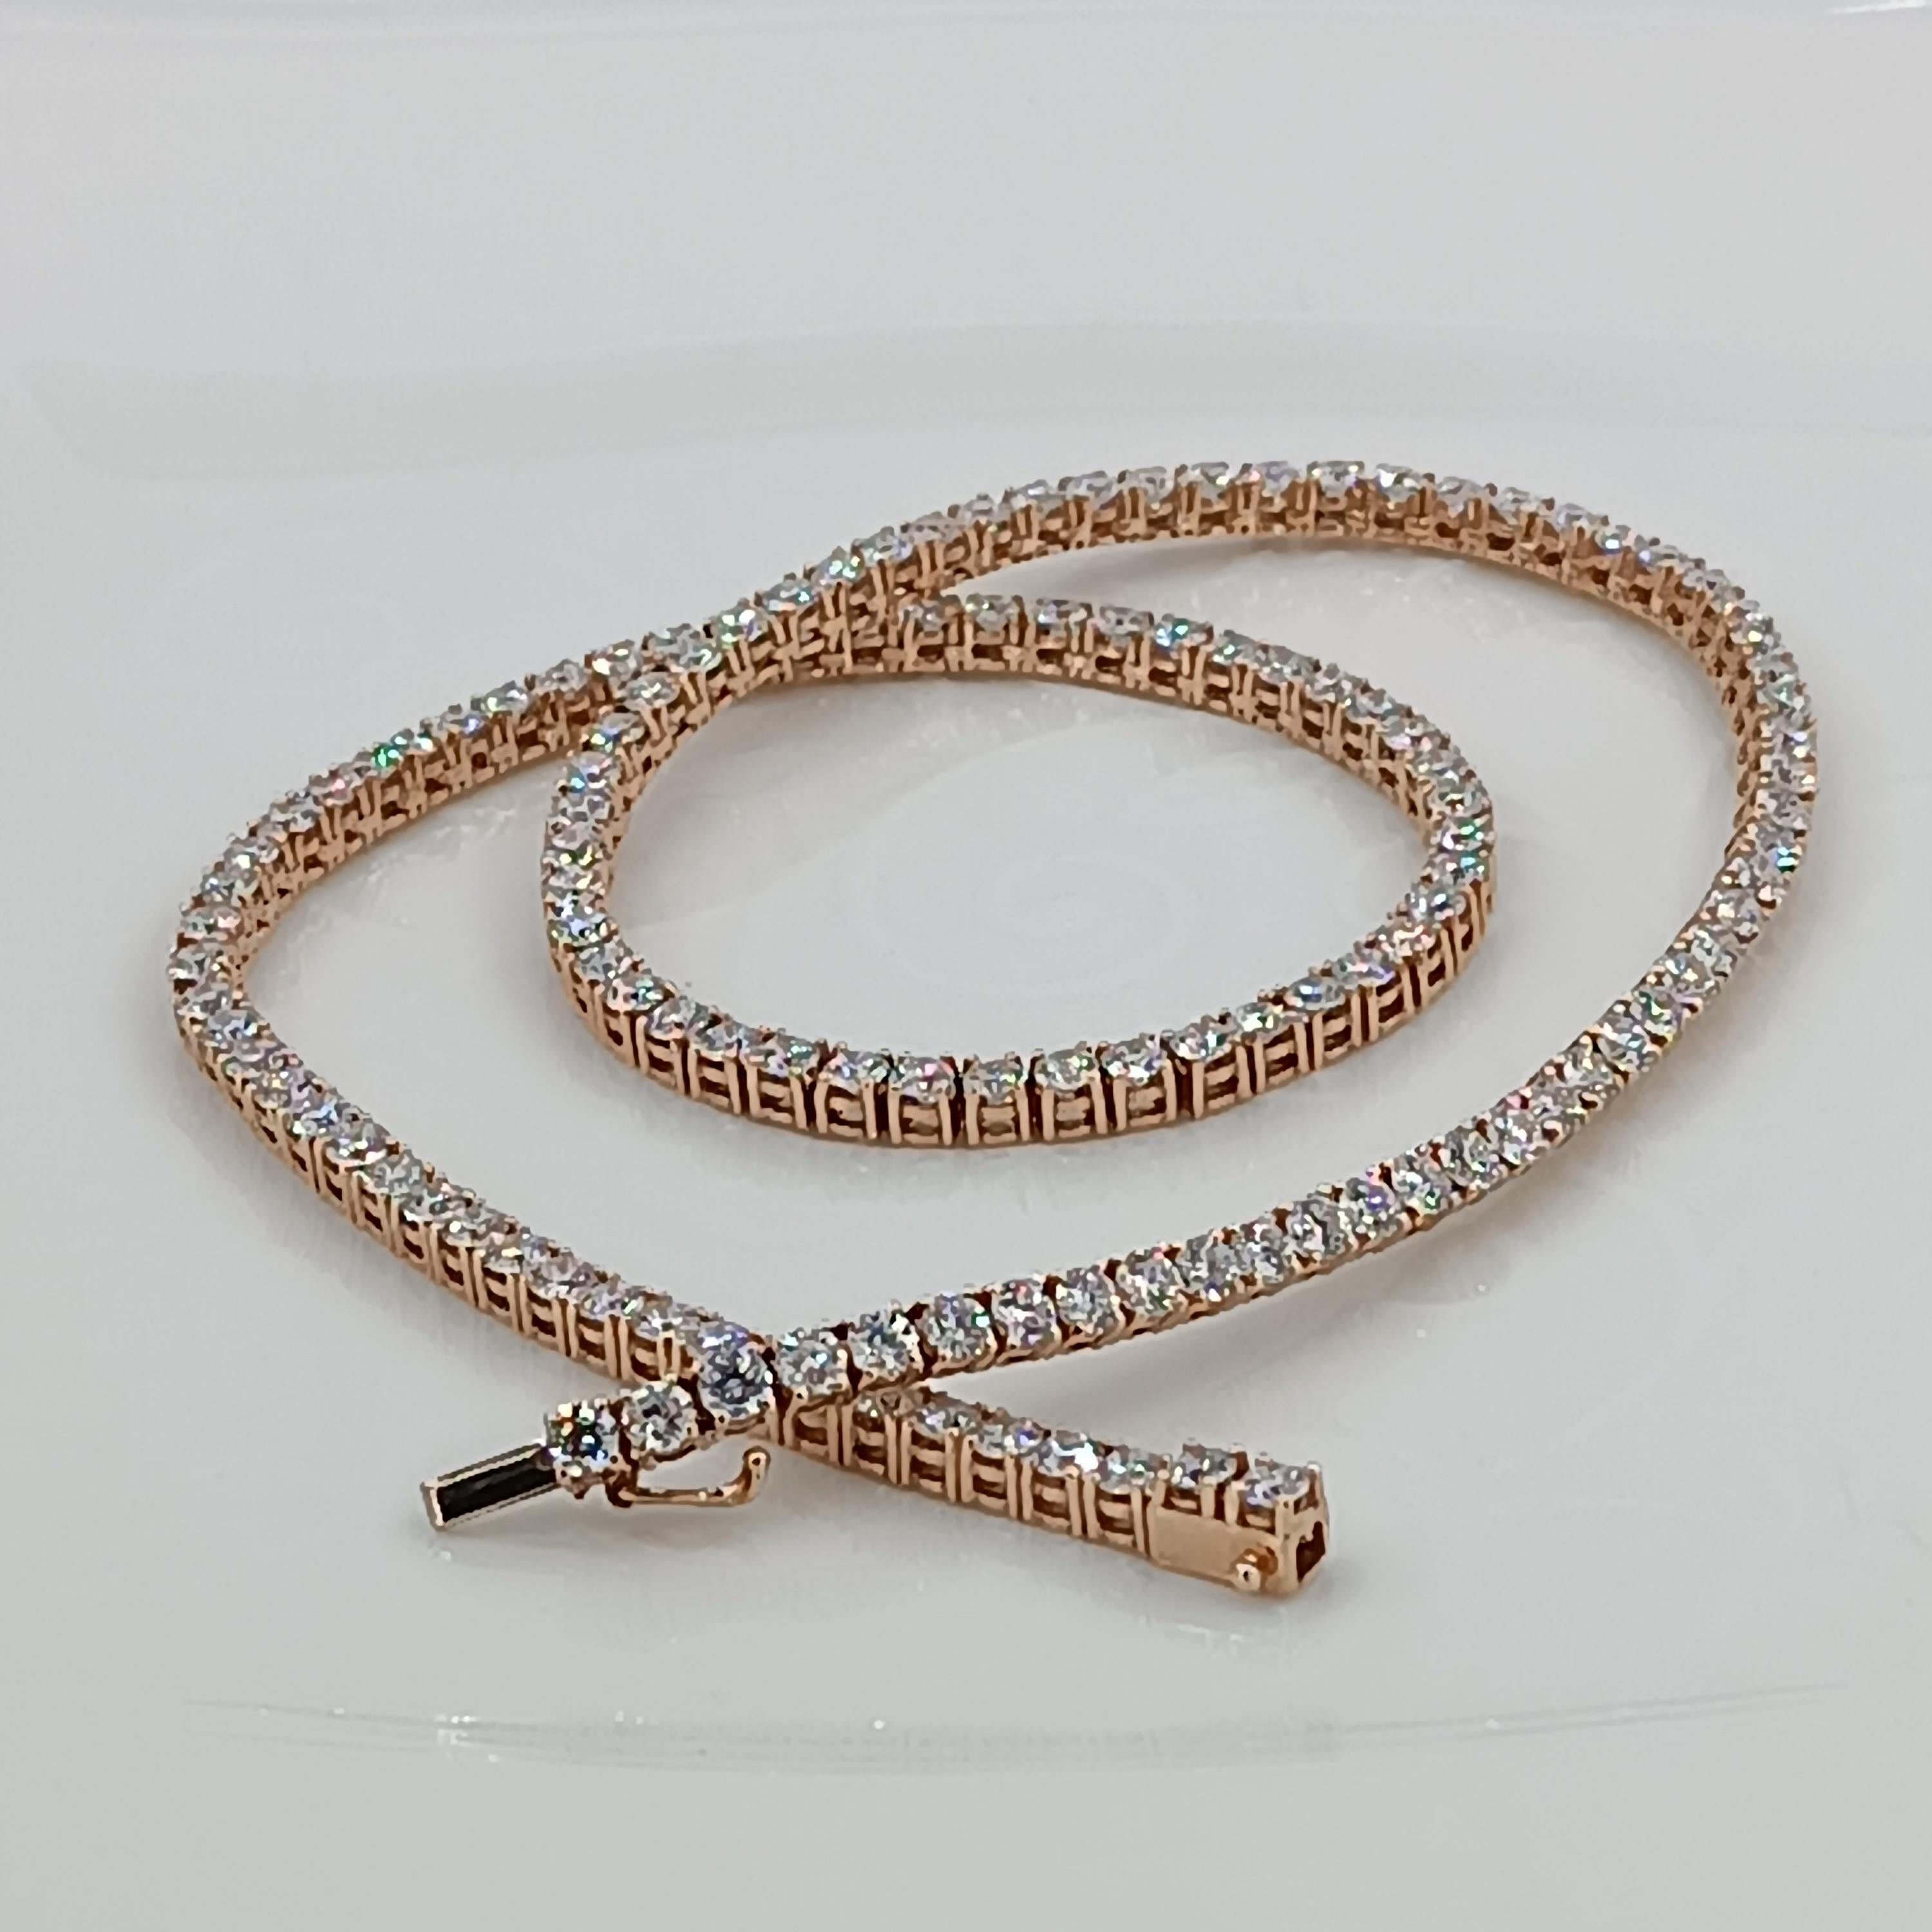 This wonderful 18 carat rose gold tennis necklace boasts 128 VS G color diamonds for a total of 13.9 carats The gold weights is 27.43 grams.
A classic masterpiece made in our workshop in Milano.
any item of our jewelry collection has a dedicated